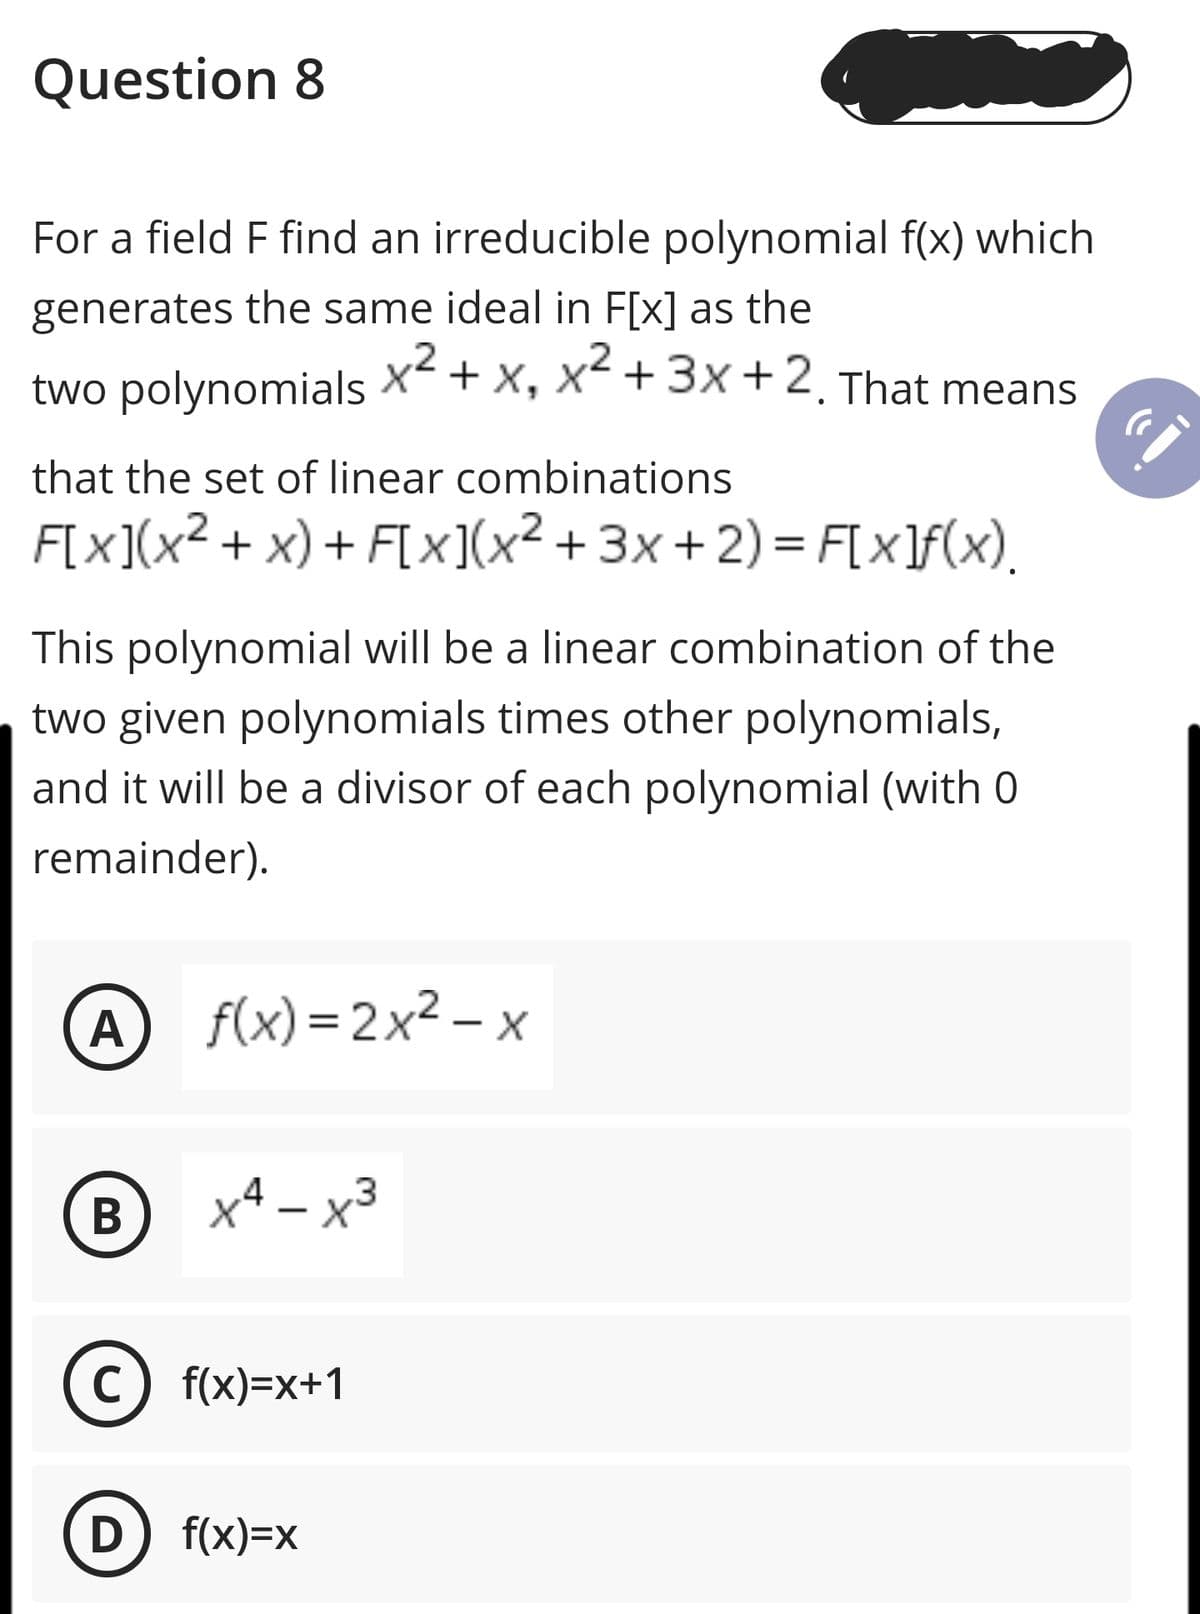 Question 8
For a field F find an irreducible polynomial f(x) which
generates the same ideal in F[x] as the
two polynomials
x2 + x, x +3x+2. That means
.2
that the set of linear combinations
F[x](x² + x) + F[x](x² + 3x + 2) = F[x]f(x),
This polynomial will be a linear combination of the
two given polynomials times other polynomials,
and it will be a divisor of each polynomial (with 0
remainder).
A f(x)=2x² – x
|
В
x4 – x3
c) f(x)=x+1
D f(x)=x
